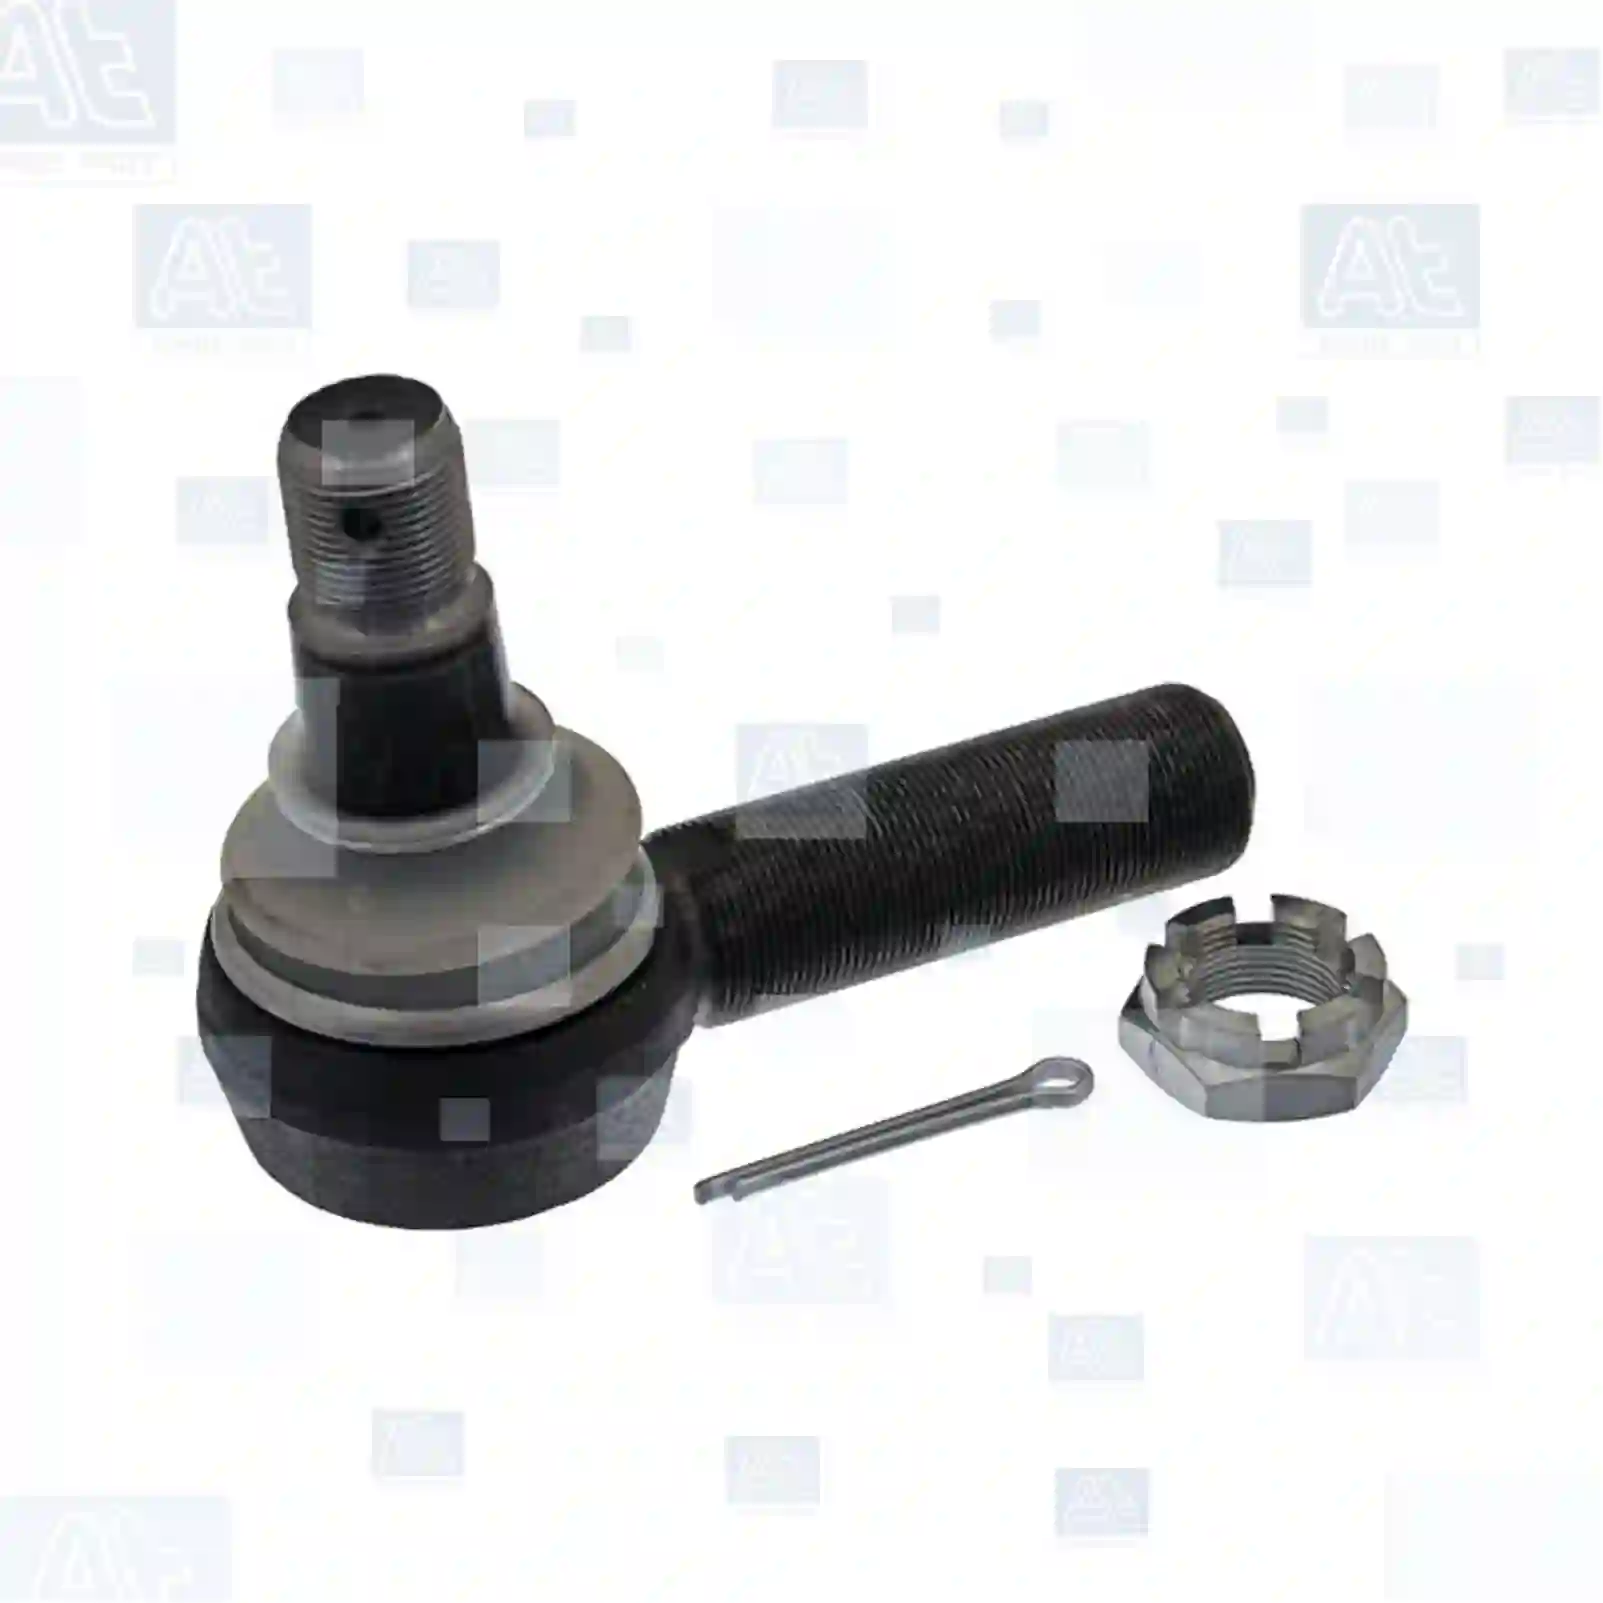 Drag Link Ball joint, left hand thread, at no: 77705105 ,  oem no:9P914835, 264072, 510052, 3141529R3, 0607053, 0690225, 0696225, 1142021, 1228115, 1329134, 1611088, 607053, 690225, 696205, 696225, 655551, 02966688, 02980323, 02984061, 03096213, 04802444, 04833820, 04833827, 04833830, 07138966, 08122754, 08190225, 42483520, 42485718, 42489395, 42491957, 42493781, 997084080374, 02984061, 04802444, 04833829, 04833830, 42489395, 42489574, 42491957, Y04505101, 56812-7M100, 02984061, 04802444, 04833823, 04833830, 07138966, 08190225, 2984061, 42489395, 42489574, 42491957, 4802444, 4833830, 5001836297, 801211834, 8190225, 571866508, 725009908, 81953010015, 81953010083, 81953010087, 81953010095, 81953010102, 81953016029, 81953016044, 81953016050, 81953016054, 81953016087, 81953016091, 81953016099, 81953016107, 81953016120, 81953016125, 81953016152, 81953016155, 81953016157, 81953016167, 81953016177, 81953016179, 81953016181, 81953016223, 81953016237, 81953016253, 81953016254, 81953016275, 81953016279, 81953016285, 81953016309, 81953016311, 81953016348, 81953016351, 81953016378, 84953016004, 90804102273, 90804102730, N1011020299, 0003300135, 0004600648, 0004601248, 0004603448, 0004603548, 0014600348, 0014601448, 0014602348, 0014603648, 0014603748, 0014607848, 0014608748, 0016077848, 0024600348, 3503307335, 3503307535, 6851476000, 6984603748, 8226236058, 011015685, 011019661, 120325101, 120325200, 122353201, 579343, 0003401170, 5000242478, 5000242486, 5000288361, 5000288378, 5000587534, 5000823265, 5000858774, 5001832581, 5001836297, 5001858759, 5001858774, 5010832583, 5430027884, 7420894053, 8001858759, 1358792, 1420821, 1738380, 1914426, 2021425, 2051165, 283783, 395009, 6851481000, 6851485000, 8226236058, 0801211834, 218633100115, 634301300, 20264072, 15176472, 1696057, 1697297, 20742129, 20745042, 20821150, 20894053, ZG40346-0008 At Spare Part | Engine, Accelerator Pedal, Camshaft, Connecting Rod, Crankcase, Crankshaft, Cylinder Head, Engine Suspension Mountings, Exhaust Manifold, Exhaust Gas Recirculation, Filter Kits, Flywheel Housing, General Overhaul Kits, Engine, Intake Manifold, Oil Cleaner, Oil Cooler, Oil Filter, Oil Pump, Oil Sump, Piston & Liner, Sensor & Switch, Timing Case, Turbocharger, Cooling System, Belt Tensioner, Coolant Filter, Coolant Pipe, Corrosion Prevention Agent, Drive, Expansion Tank, Fan, Intercooler, Monitors & Gauges, Radiator, Thermostat, V-Belt / Timing belt, Water Pump, Fuel System, Electronical Injector Unit, Feed Pump, Fuel Filter, cpl., Fuel Gauge Sender,  Fuel Line, Fuel Pump, Fuel Tank, Injection Line Kit, Injection Pump, Exhaust System, Clutch & Pedal, Gearbox, Propeller Shaft, Axles, Brake System, Hubs & Wheels, Suspension, Leaf Spring, Universal Parts / Accessories, Steering, Electrical System, Cabin